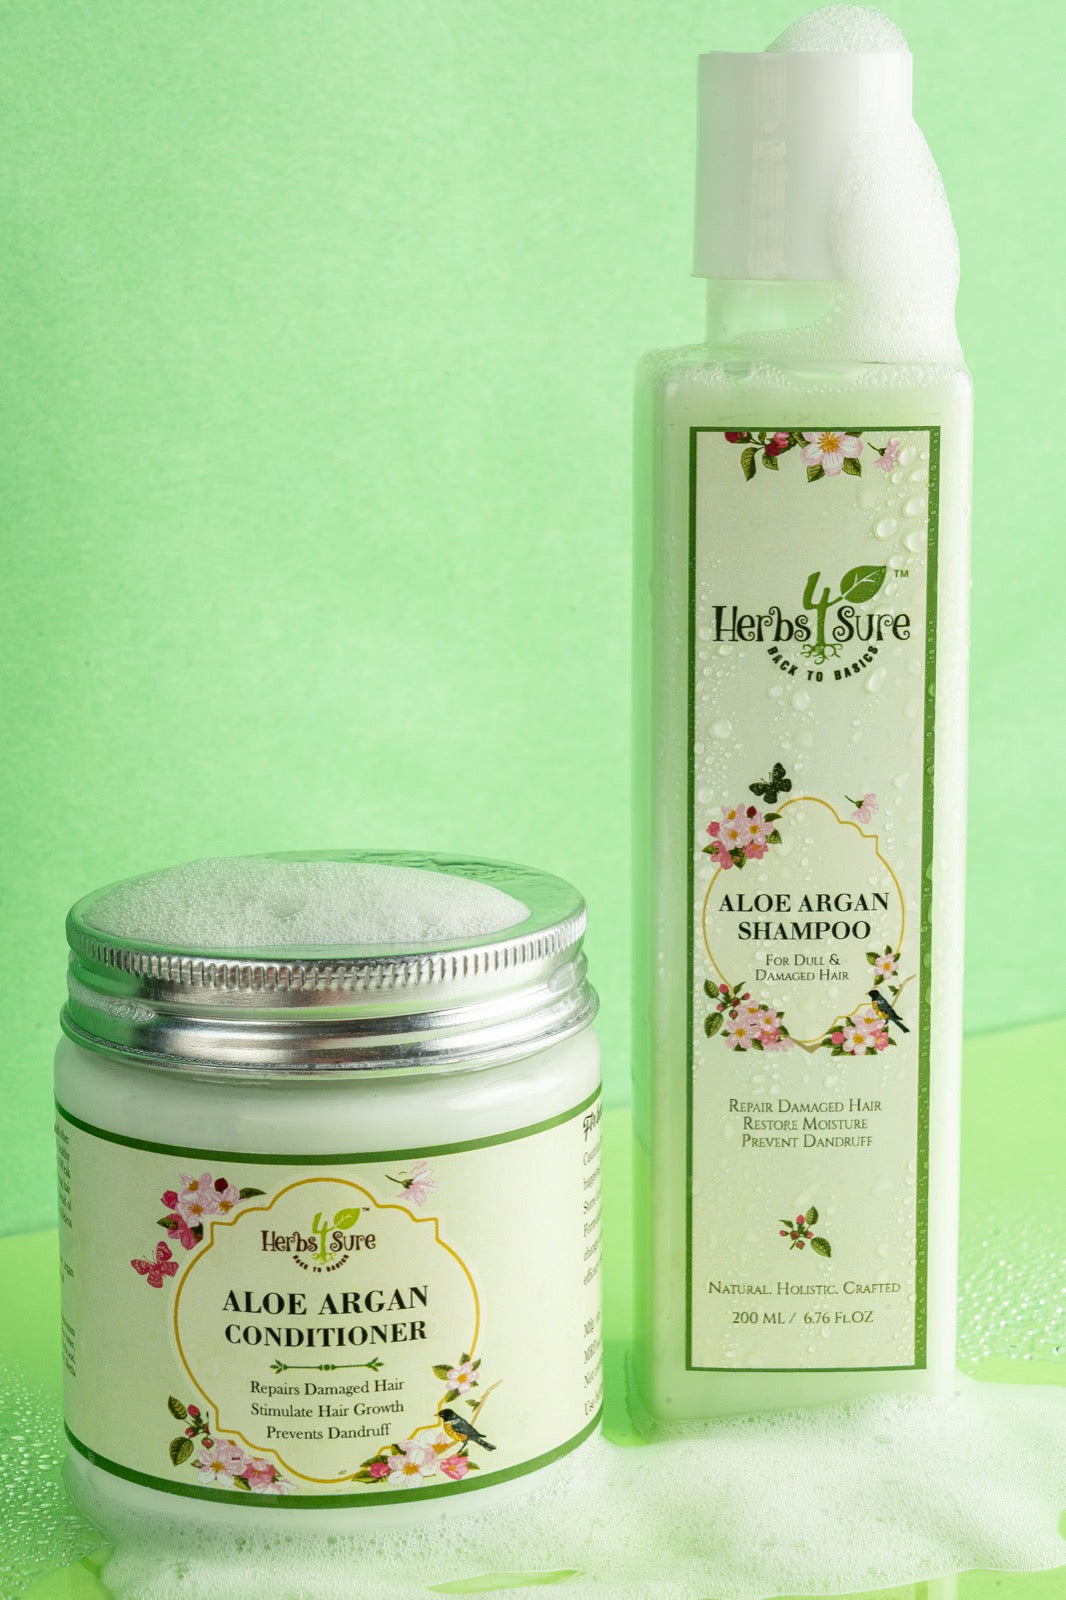 ALOE ARGAN CONDITIONER- FOR DAILY USE- DANDRUFF PRONE SCALP - TREATS DRY DULL FRIZZY HAIR